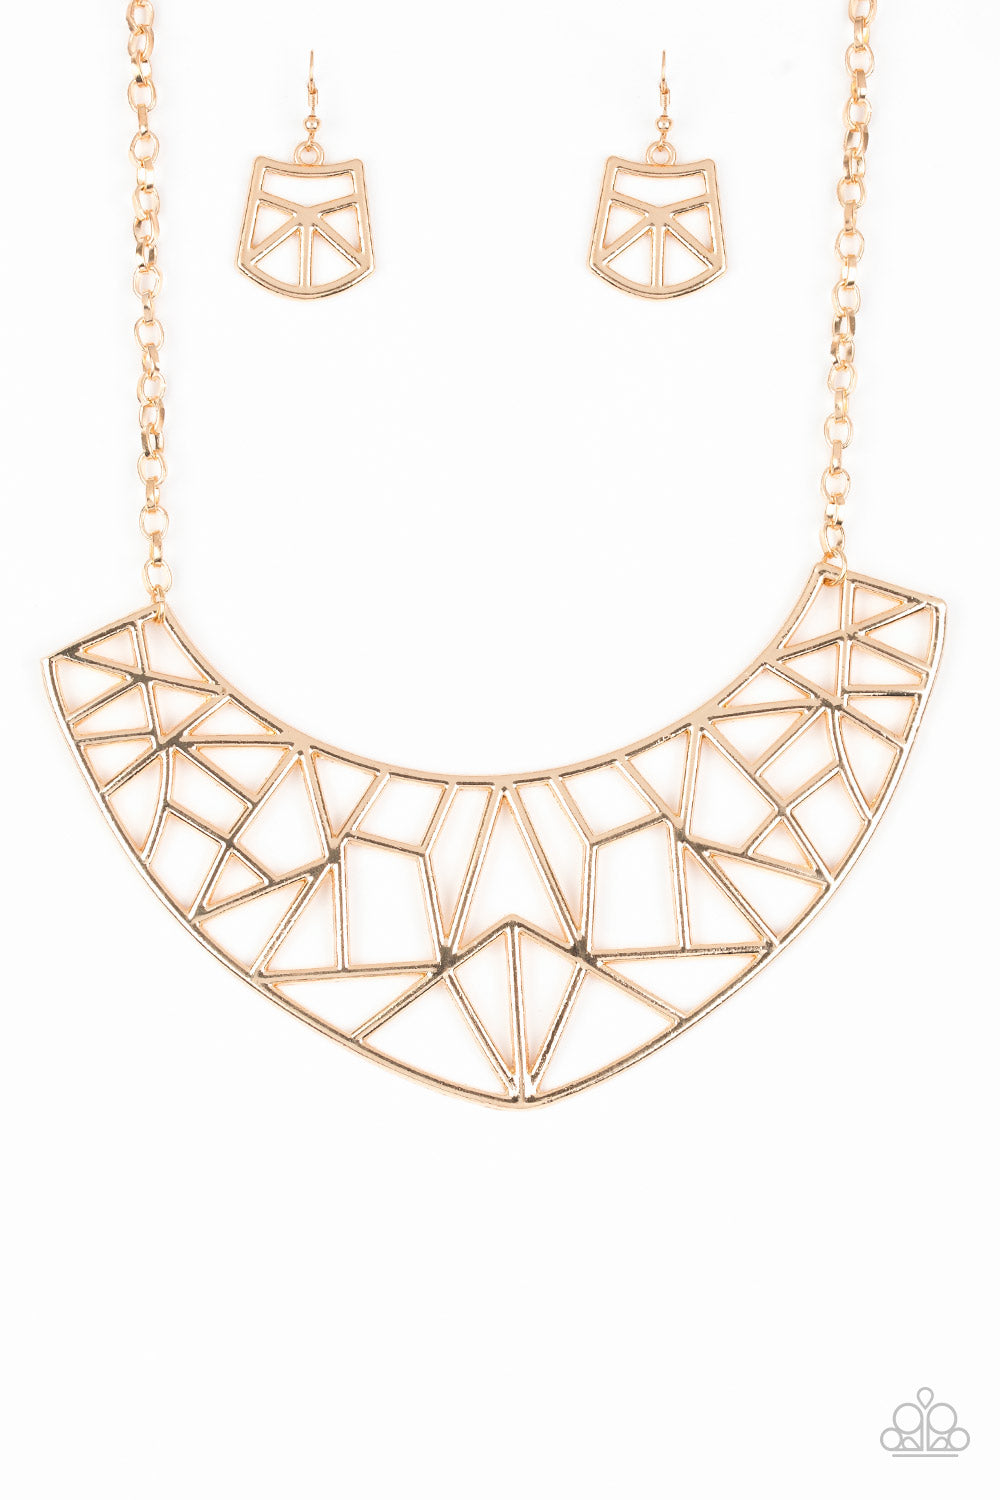 strike-while-haute-gold necklace - TheMasterCollection